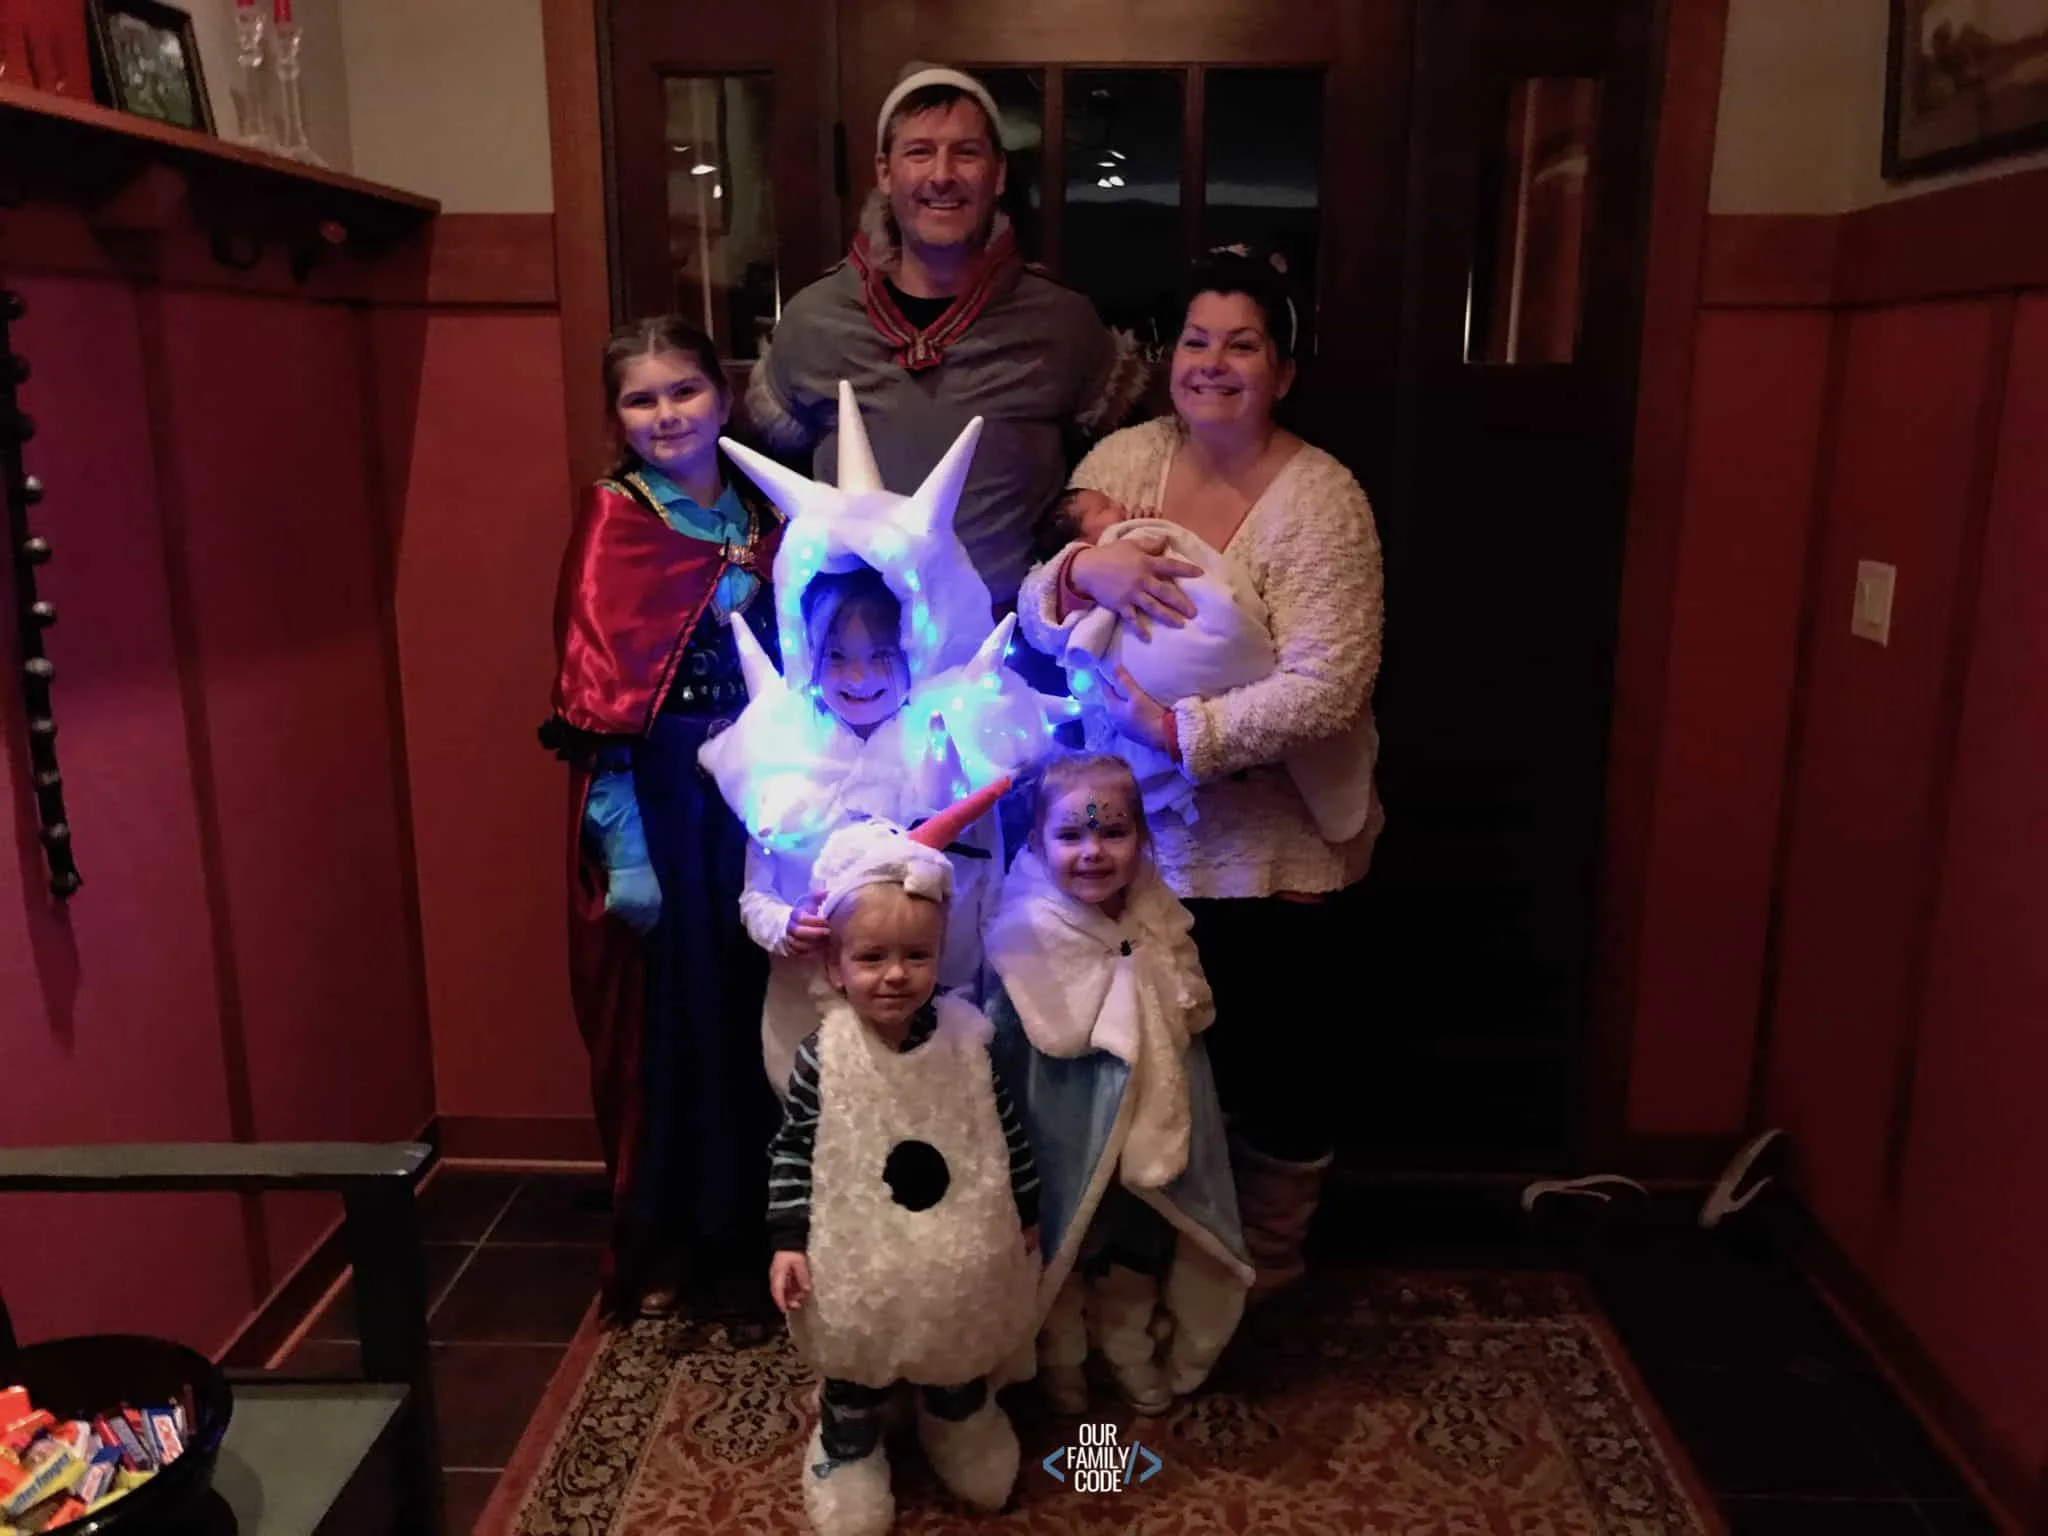 A picture of a frozen family costume photo 2019 halloween.